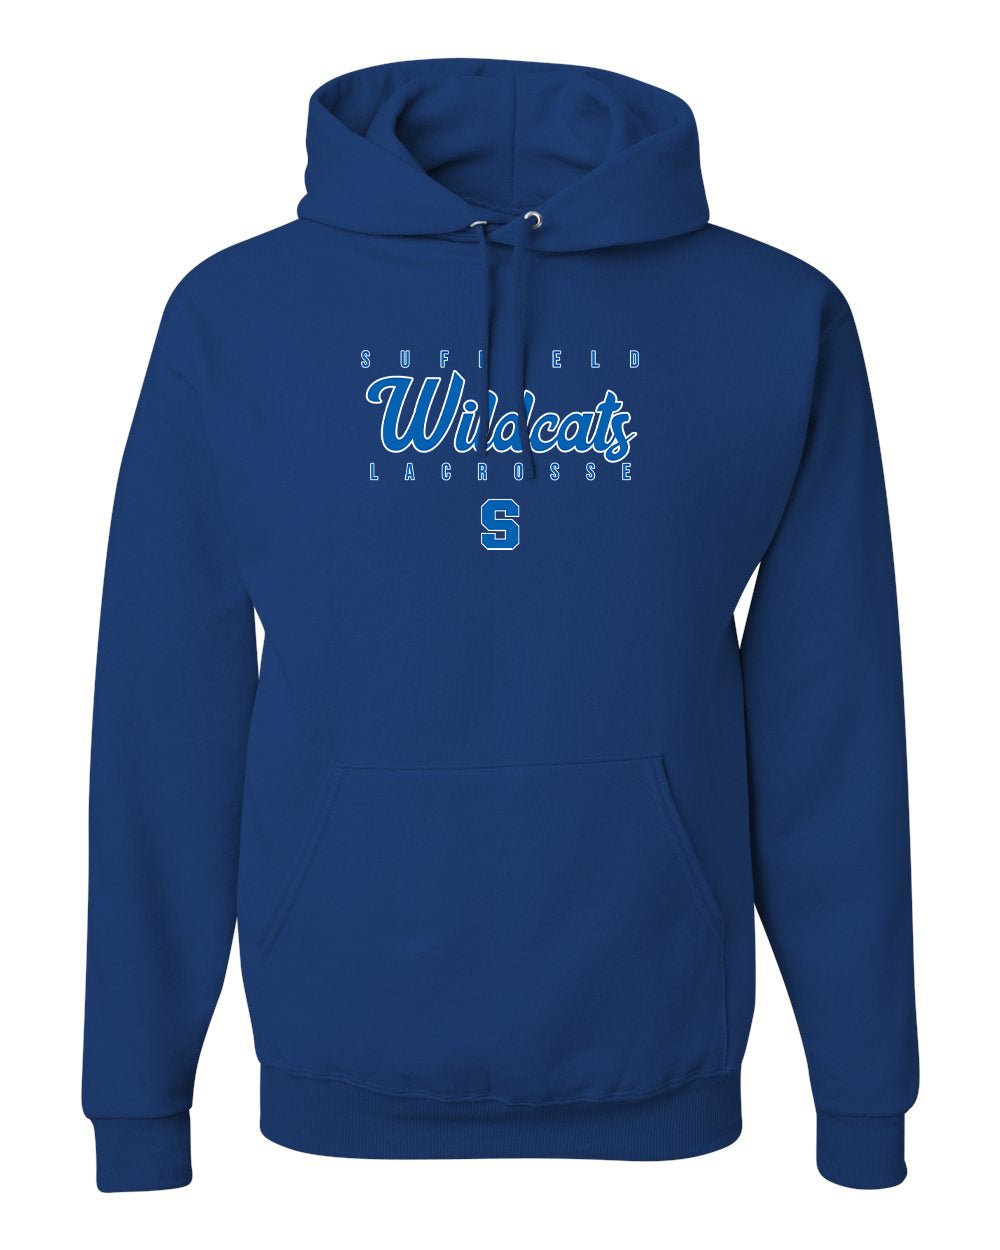 Suffield High Lacrosse - Adult Fleece Hoodie "SHL" - 996MR (color options available)